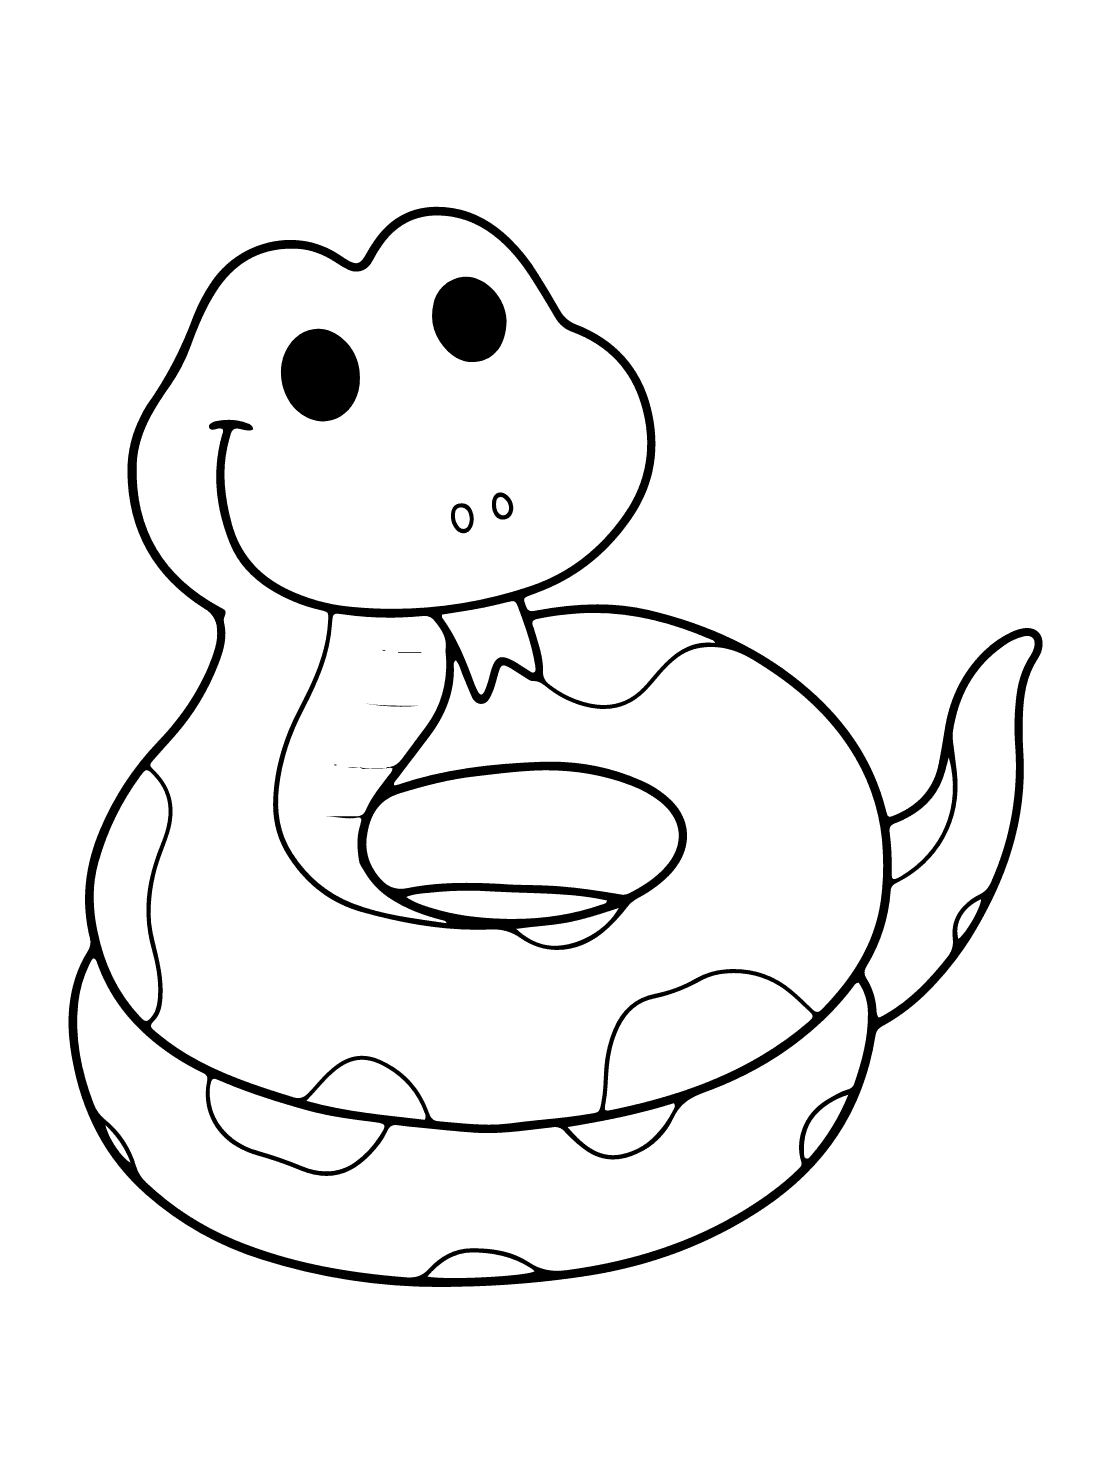 Cute snake coloring page